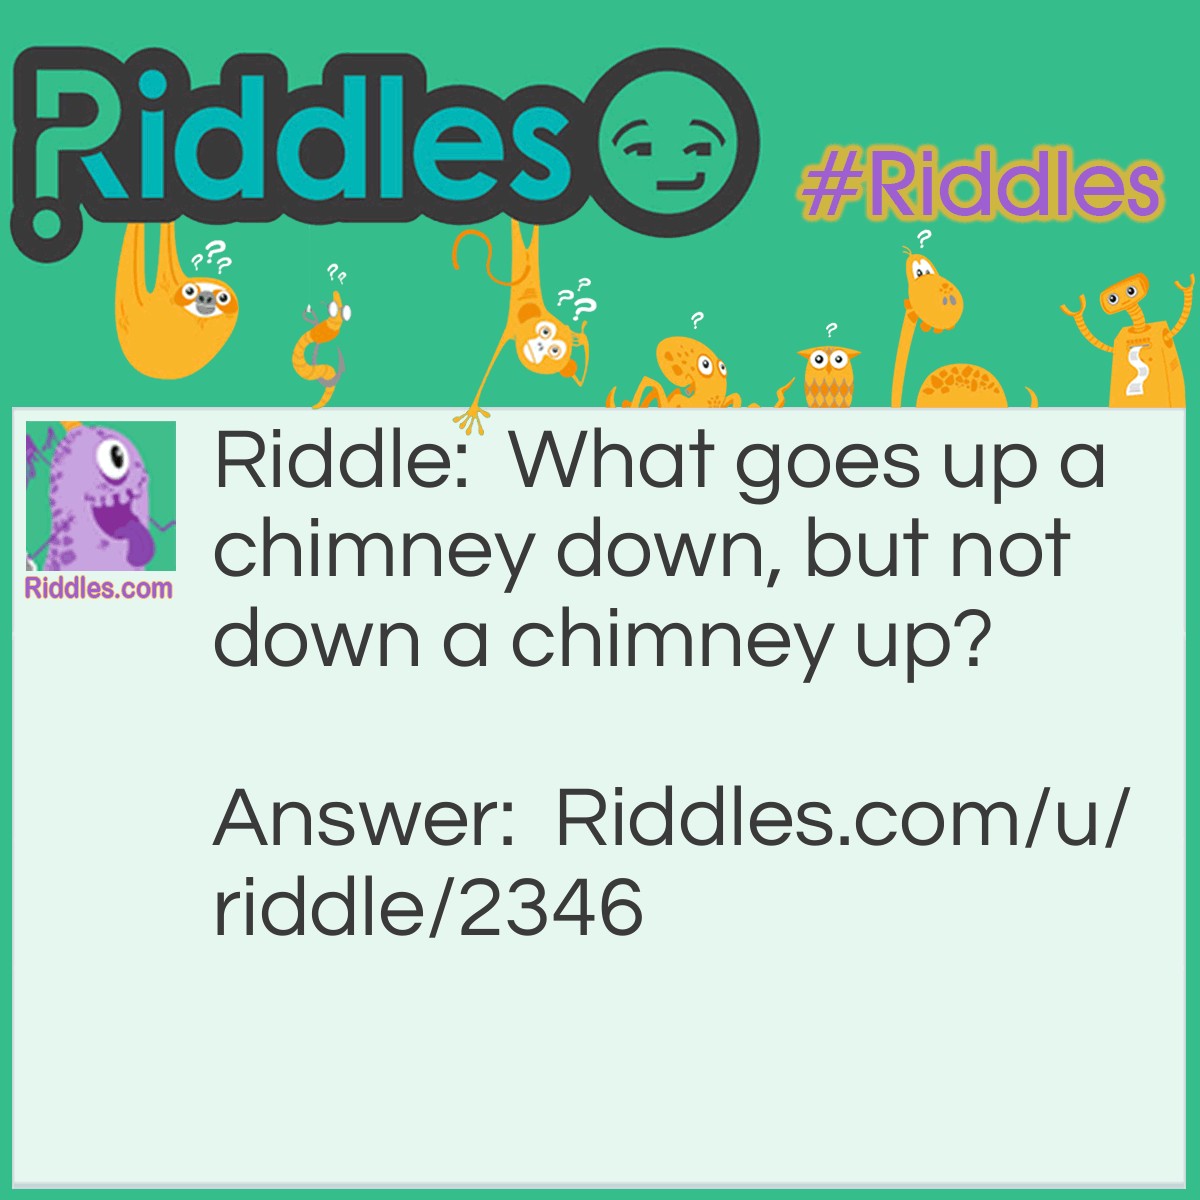 Riddle: What goes up a chimney down, but not down a chimney up? Answer: An umberella.